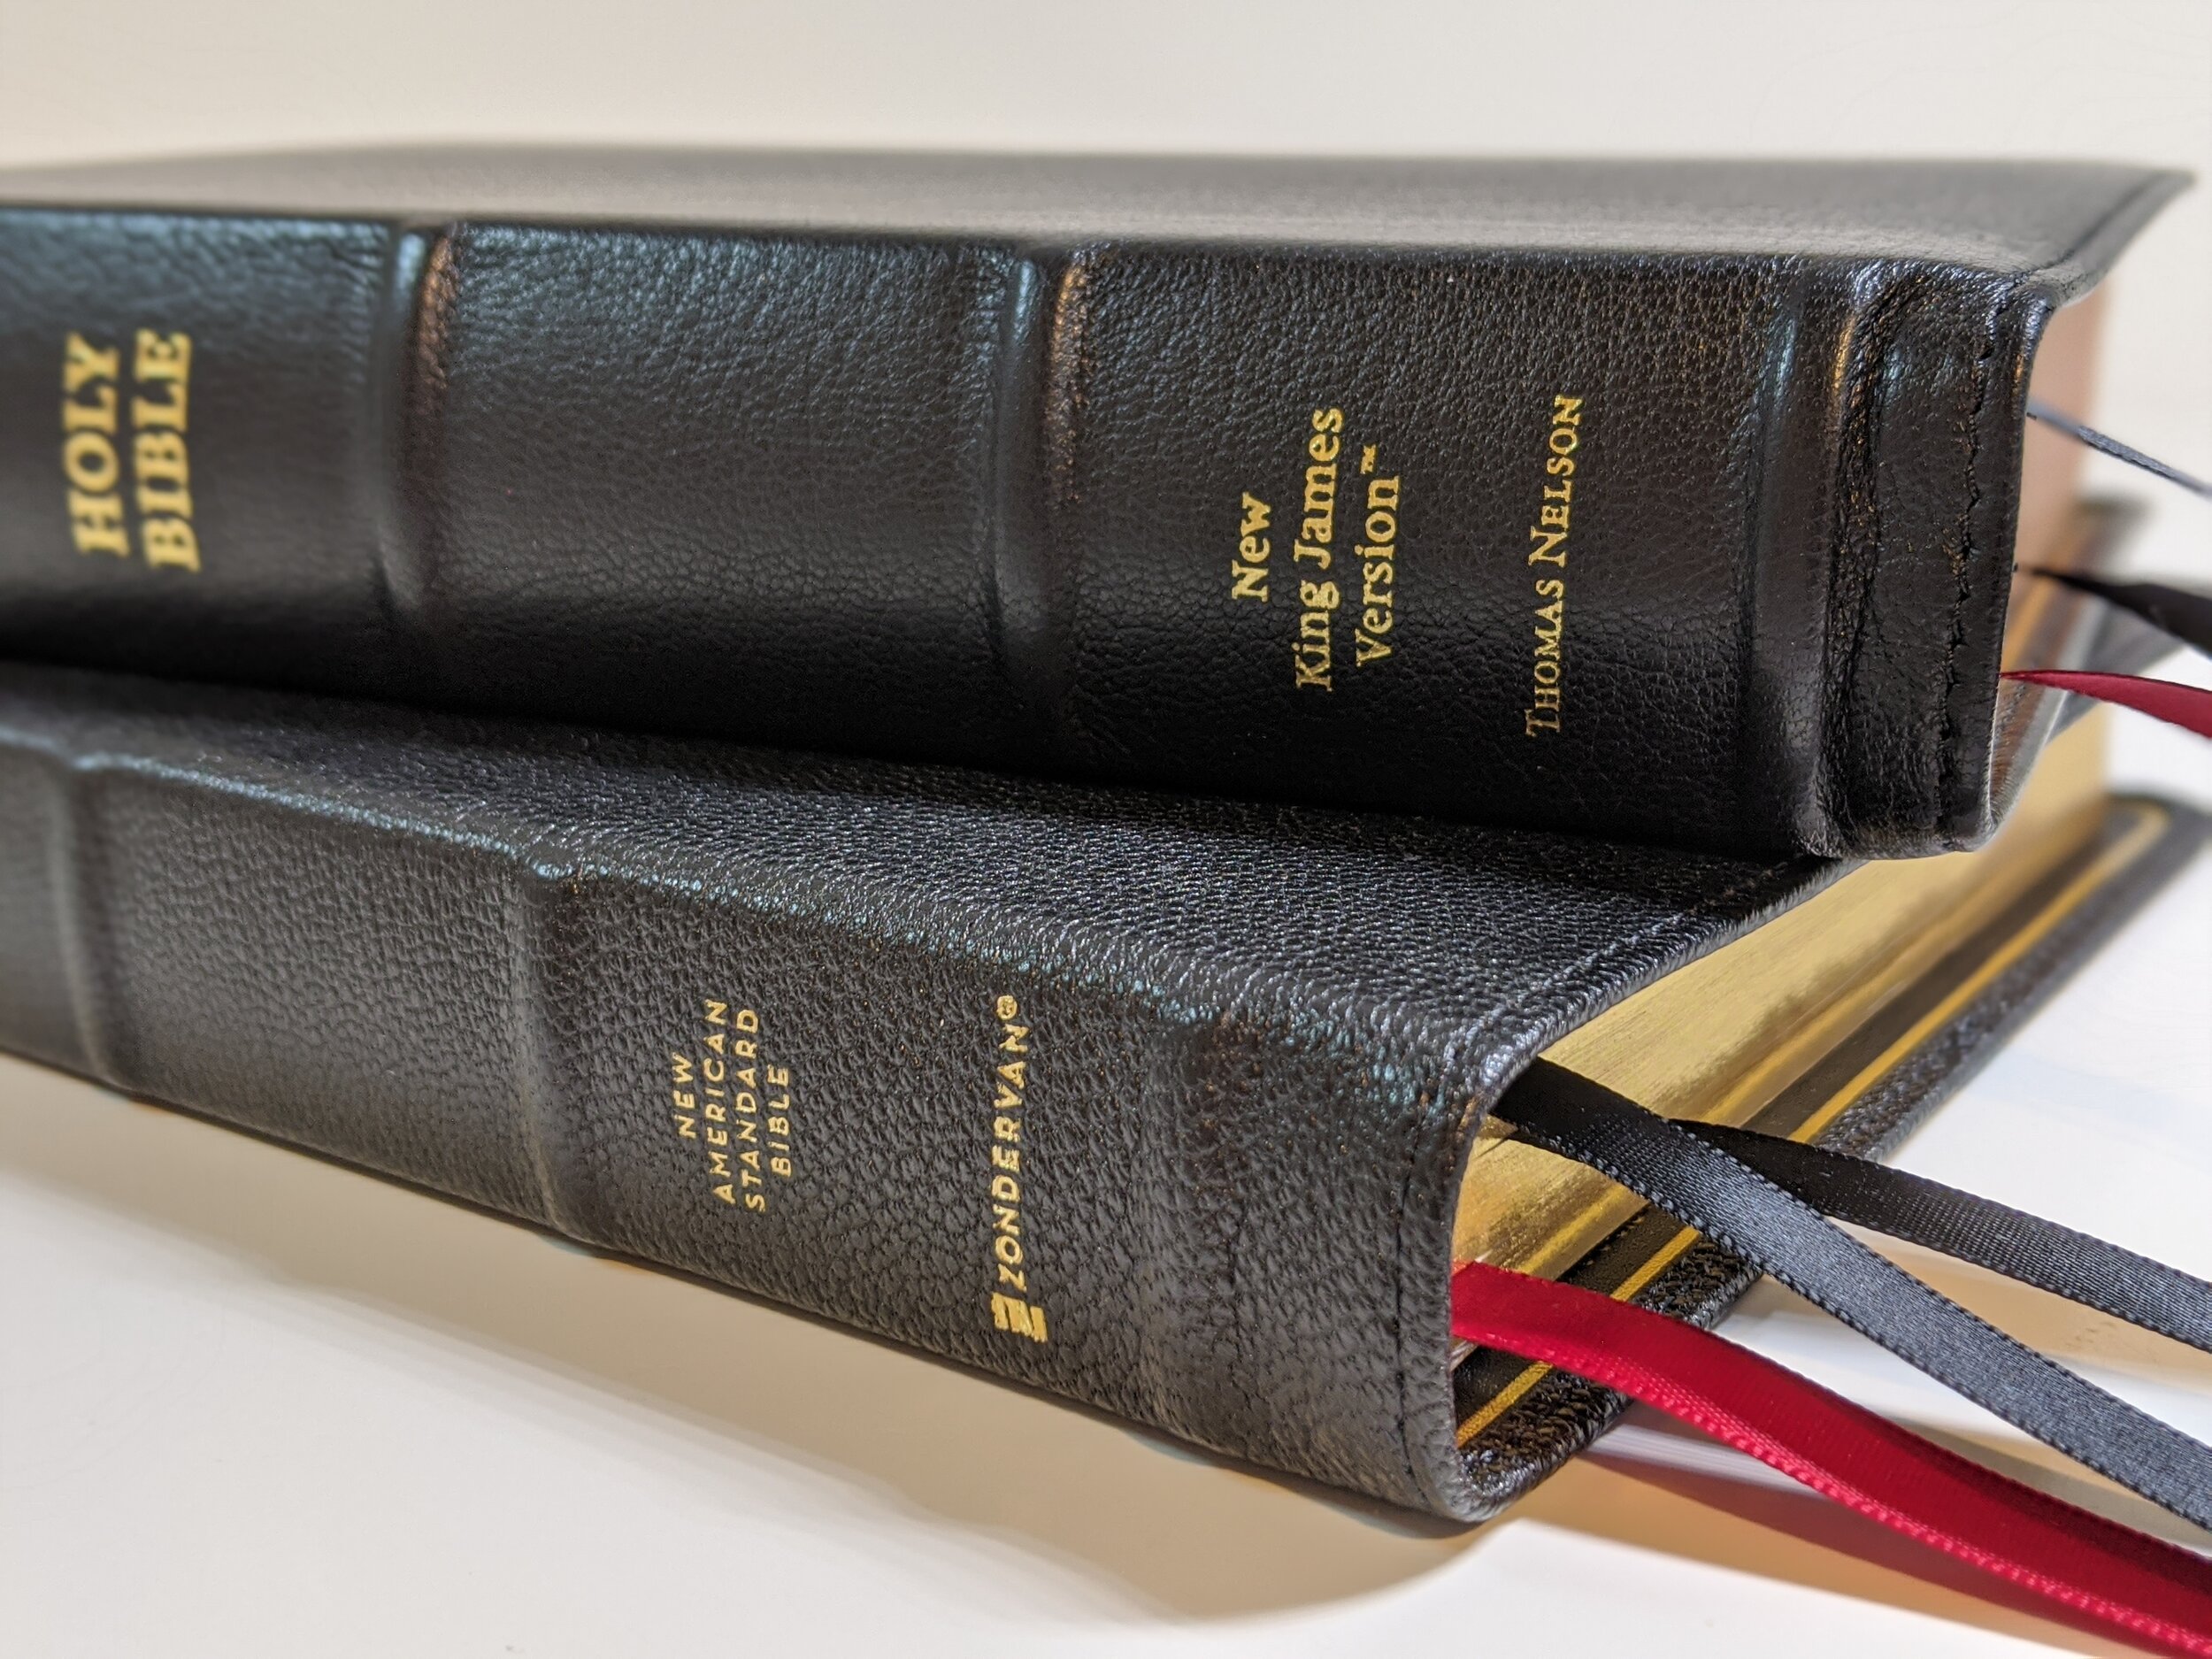  You will notice the goatskin is more smooth on the NKJV and the NASB has more grain. I think the NASB goatskin is the best I’ve seen coming out of China so far.  